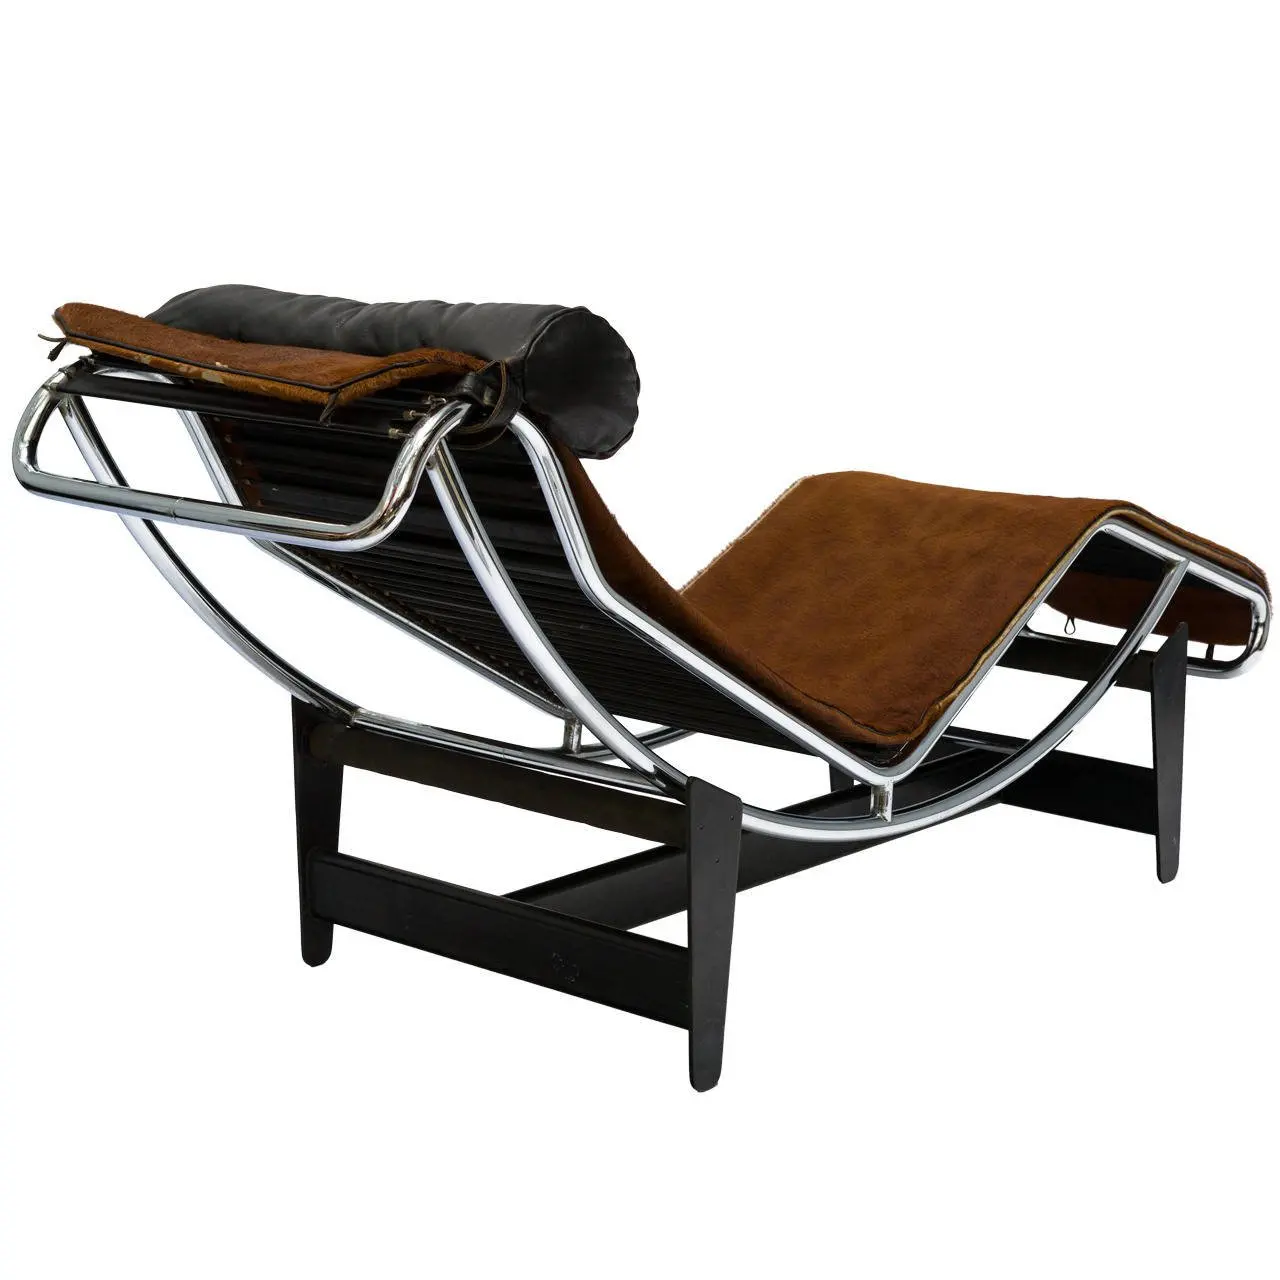 Modern Design Home Furniture Europe Style Cow Leather Lc4 Chaise